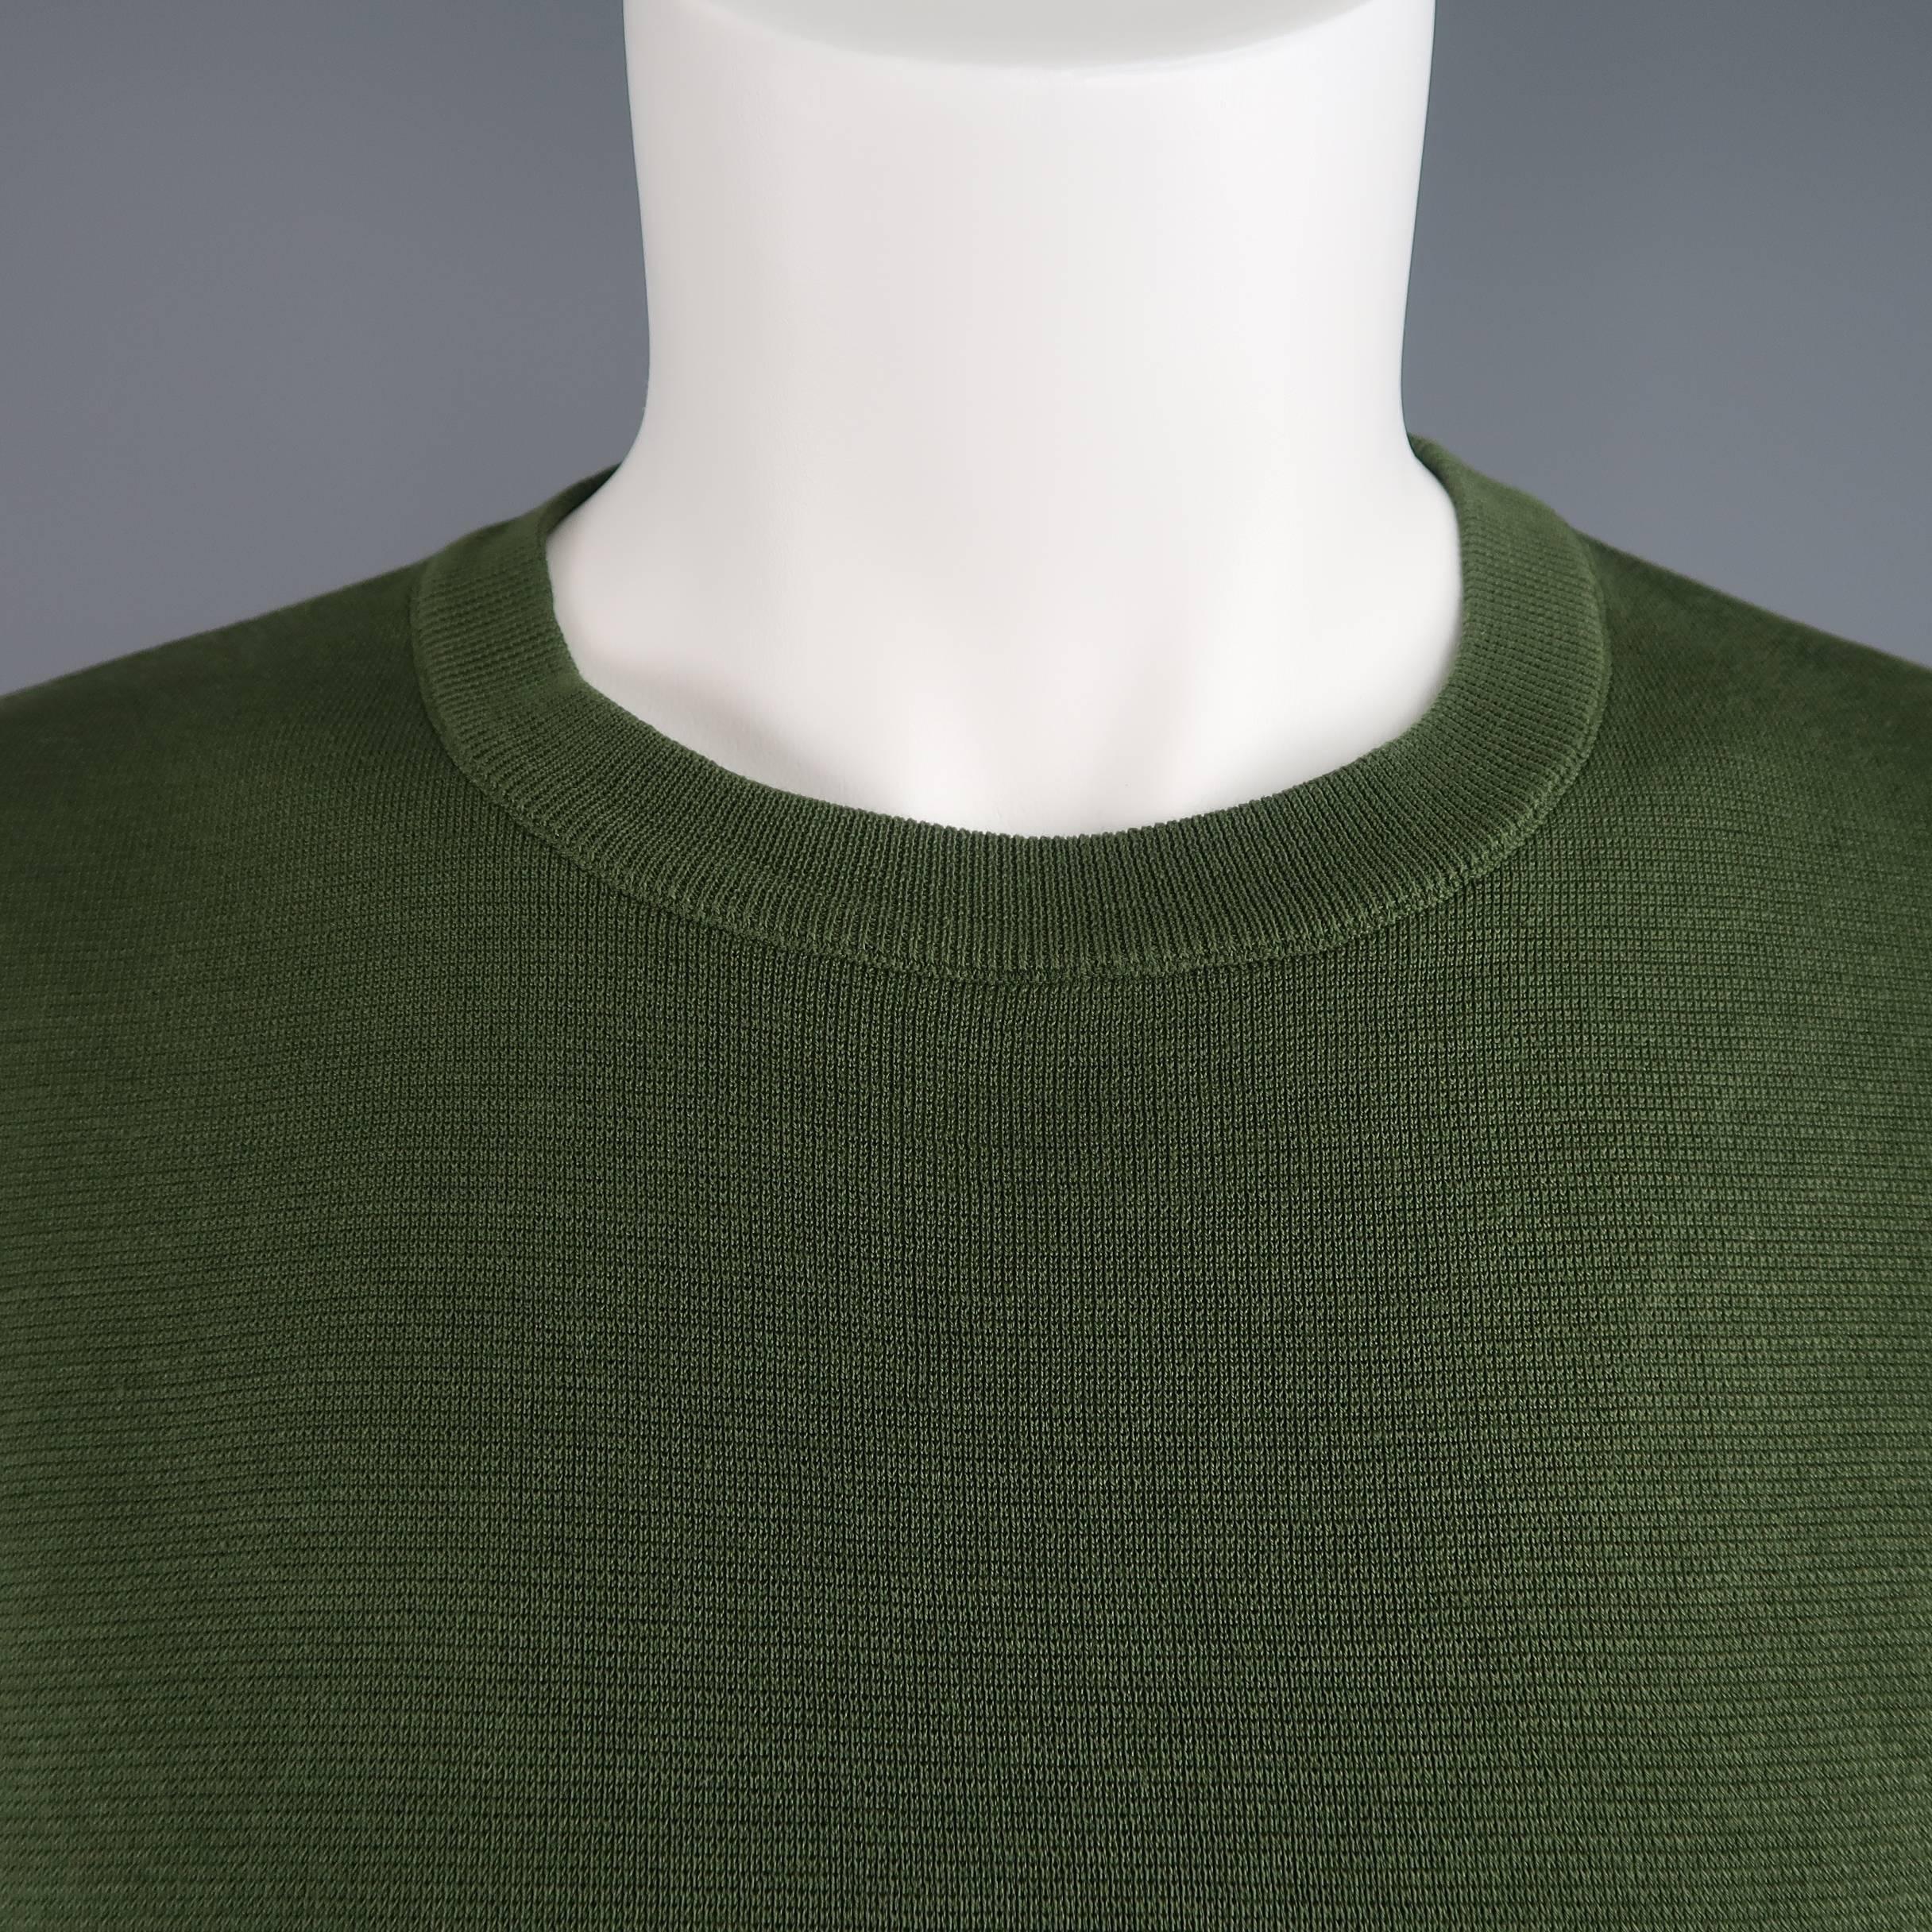 JIL SANDER pullover comes in a cotton knit and features a crewneck and boxy, drop shoulder short sleeves. Made in Italy.
 
New with Tags.
Marked: IT 48
 
Measurements:
 
Shoulder: 22 in.
Chest: 38 in.
Sleeve: 7 in.
Length: 22 in.

SKU: 86213